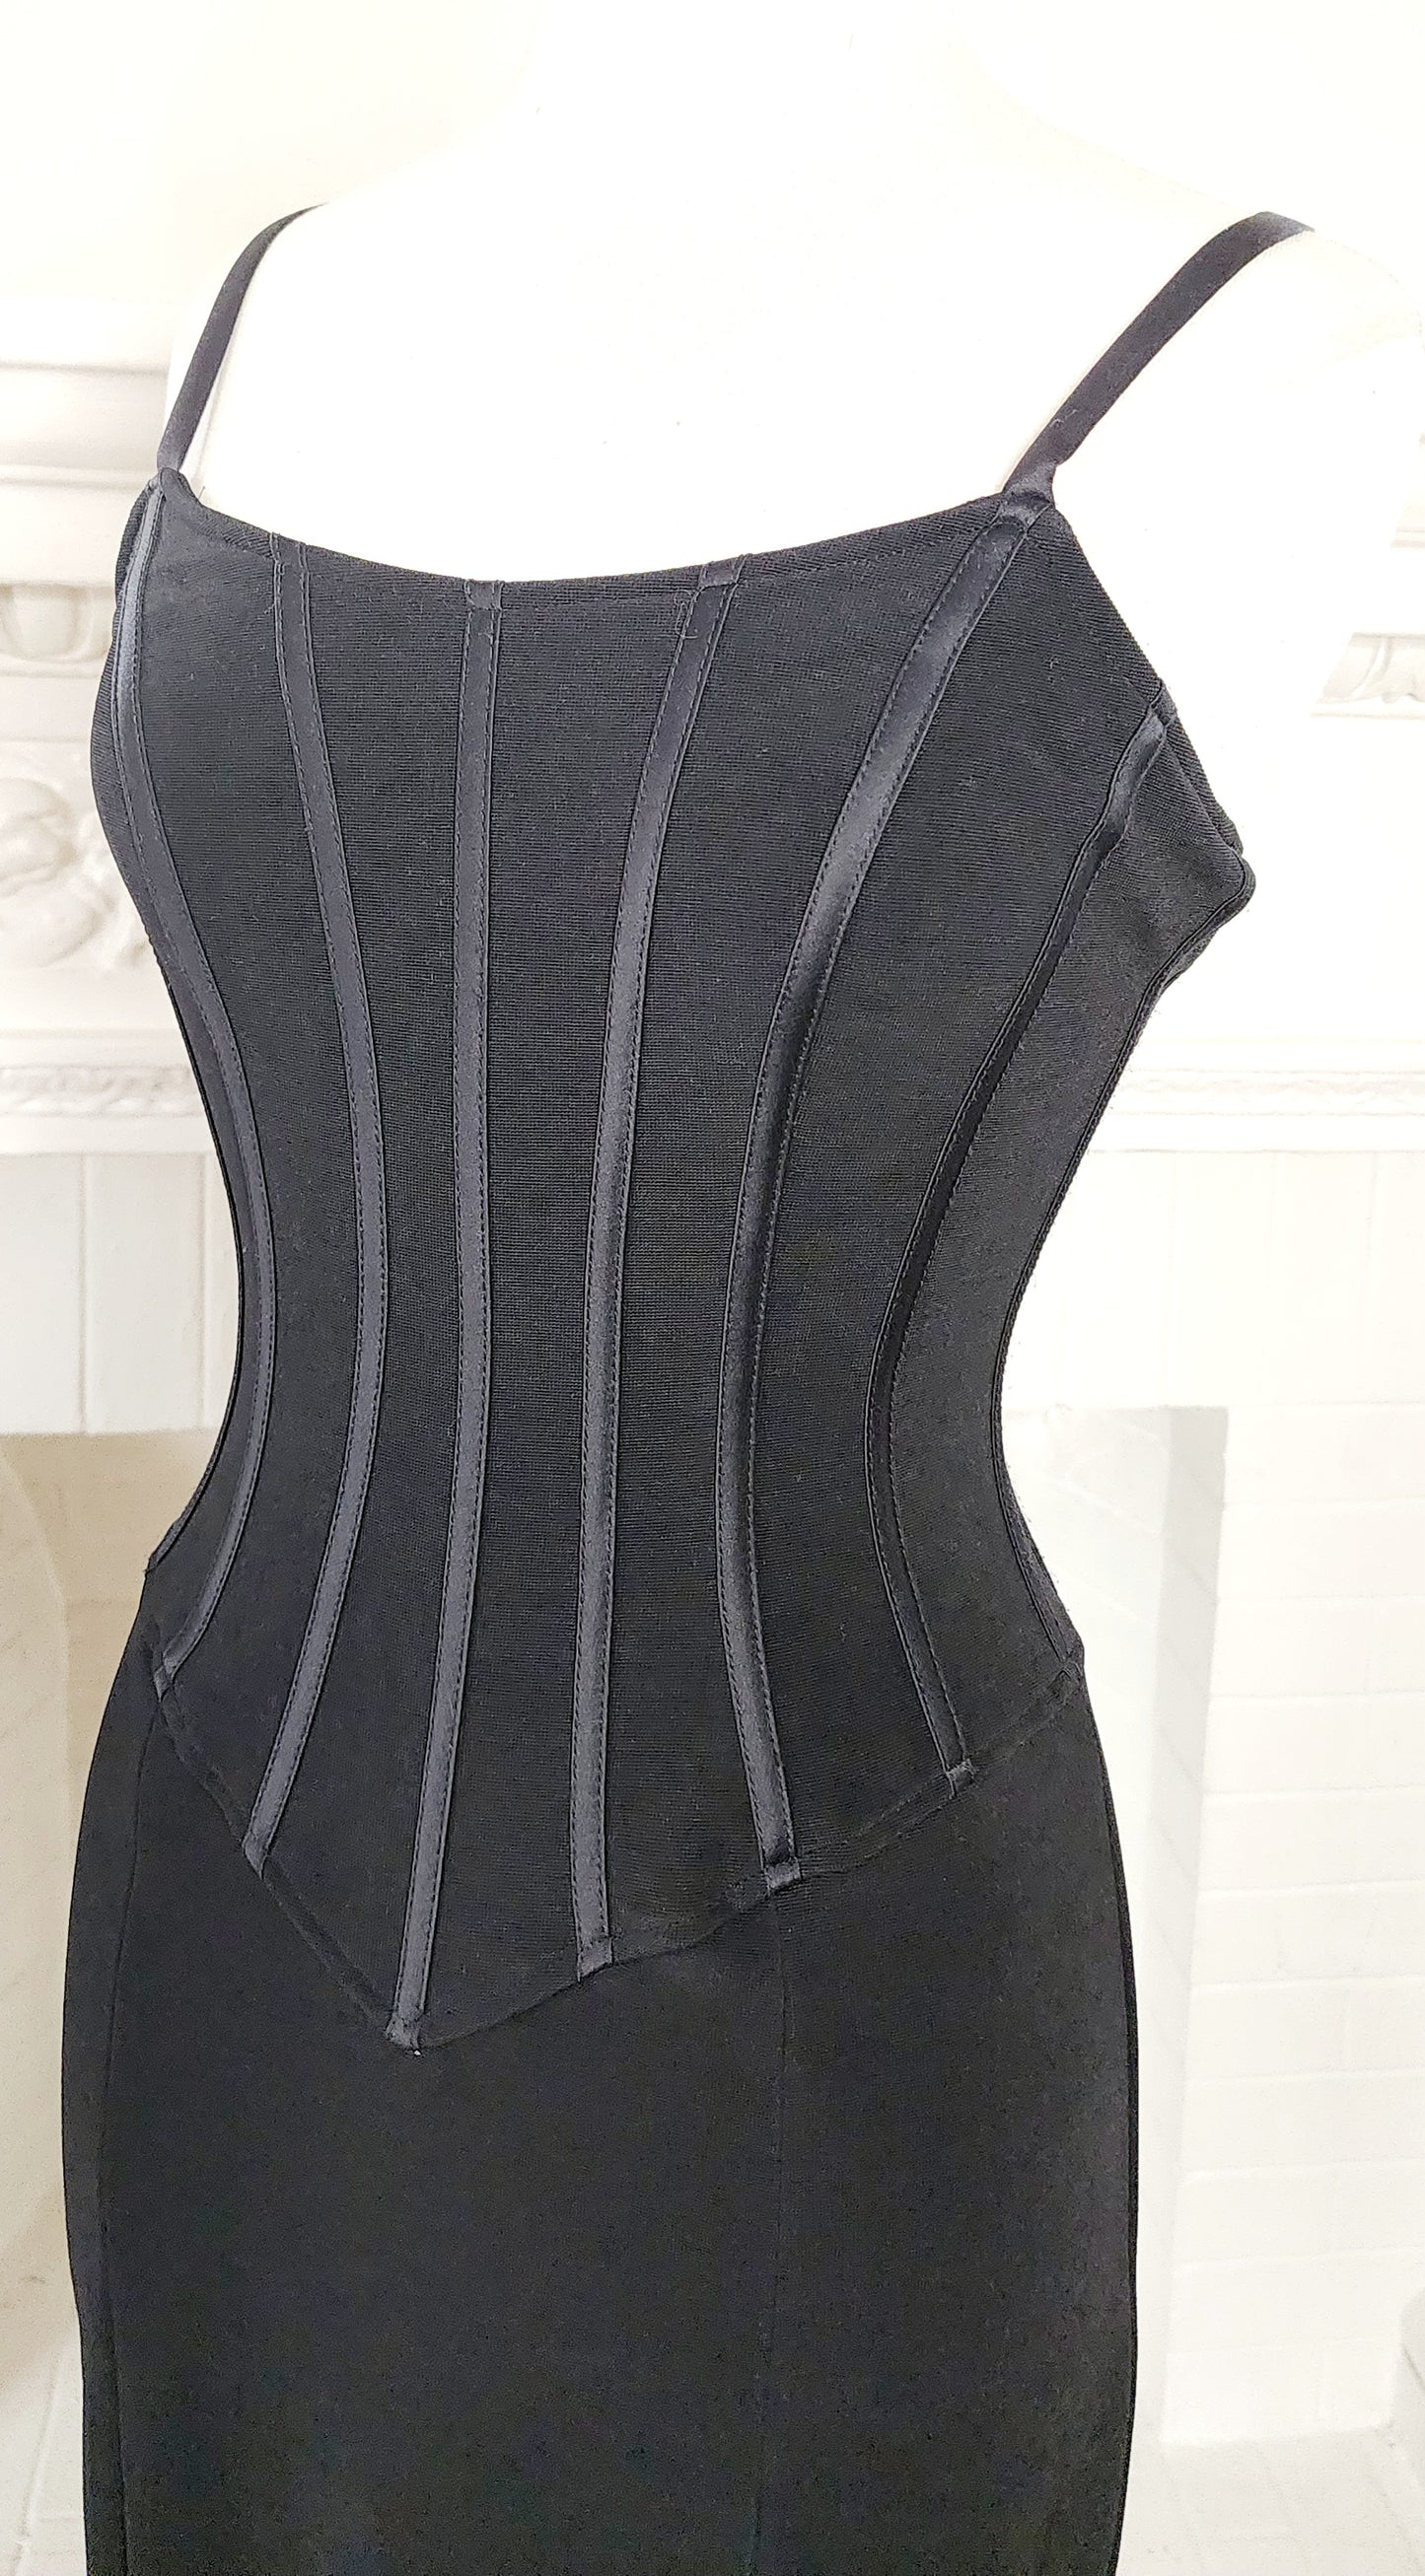 90s Black Evening Dress Striped Bustier by Betsy & Adam / Small